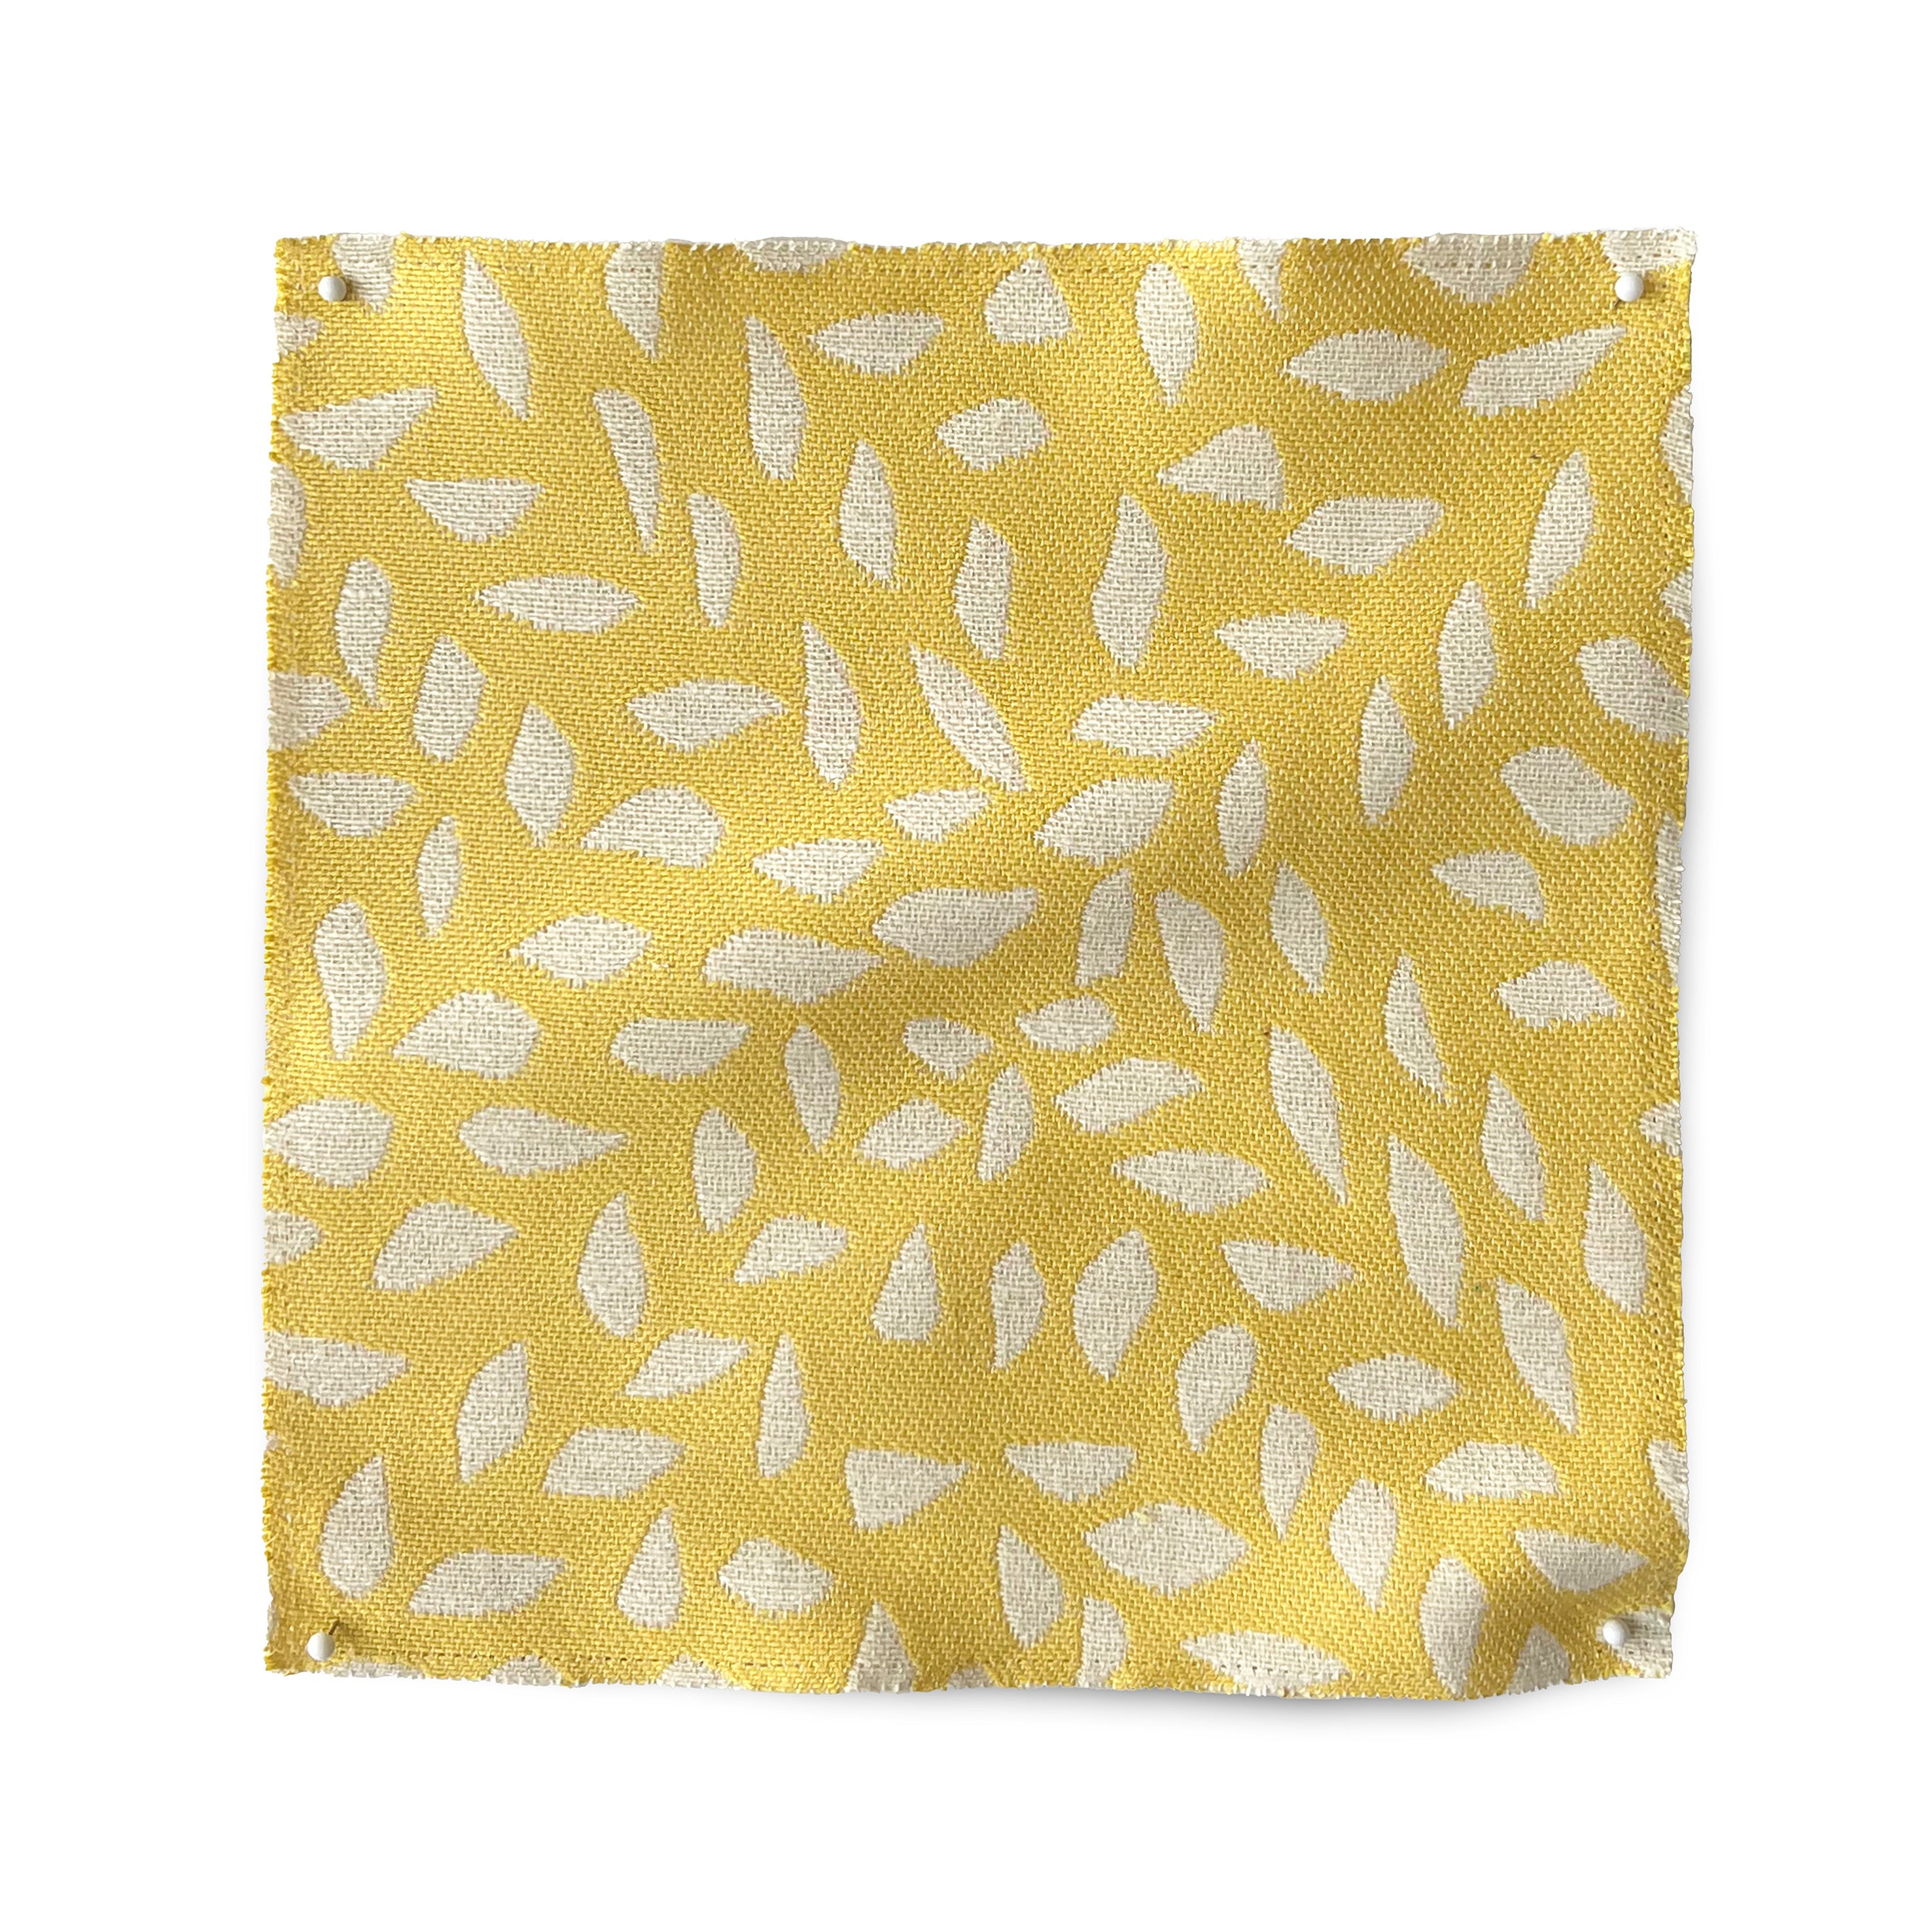 Square fabric swatch in a botanical trellis print in white on a yellow field.